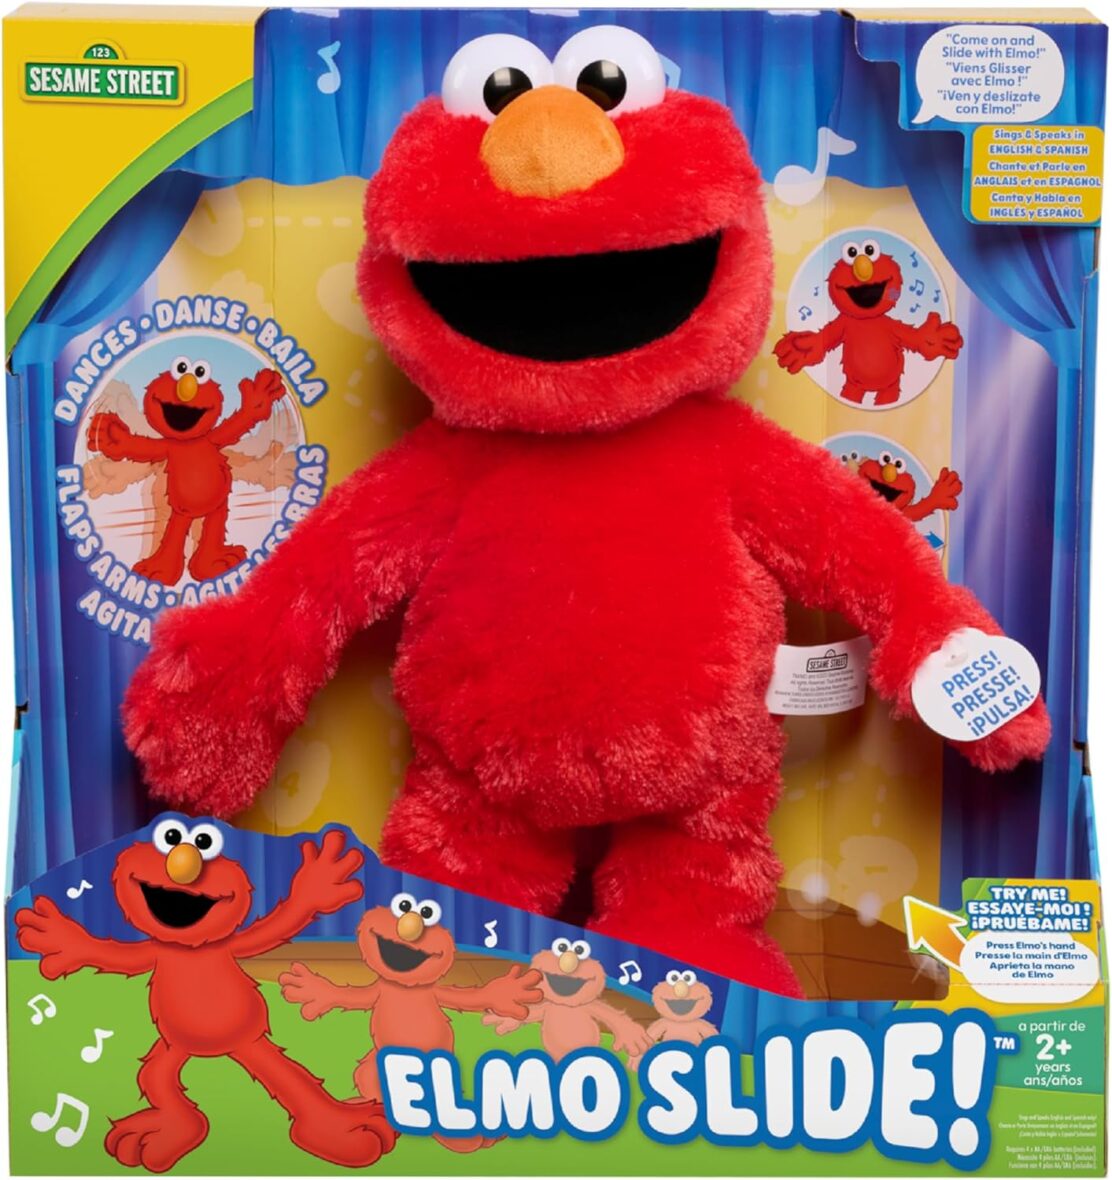 Sesame Street Elmo Slide Singing and Dancing 14-inch Plush, Officially Licensed Kids Toy